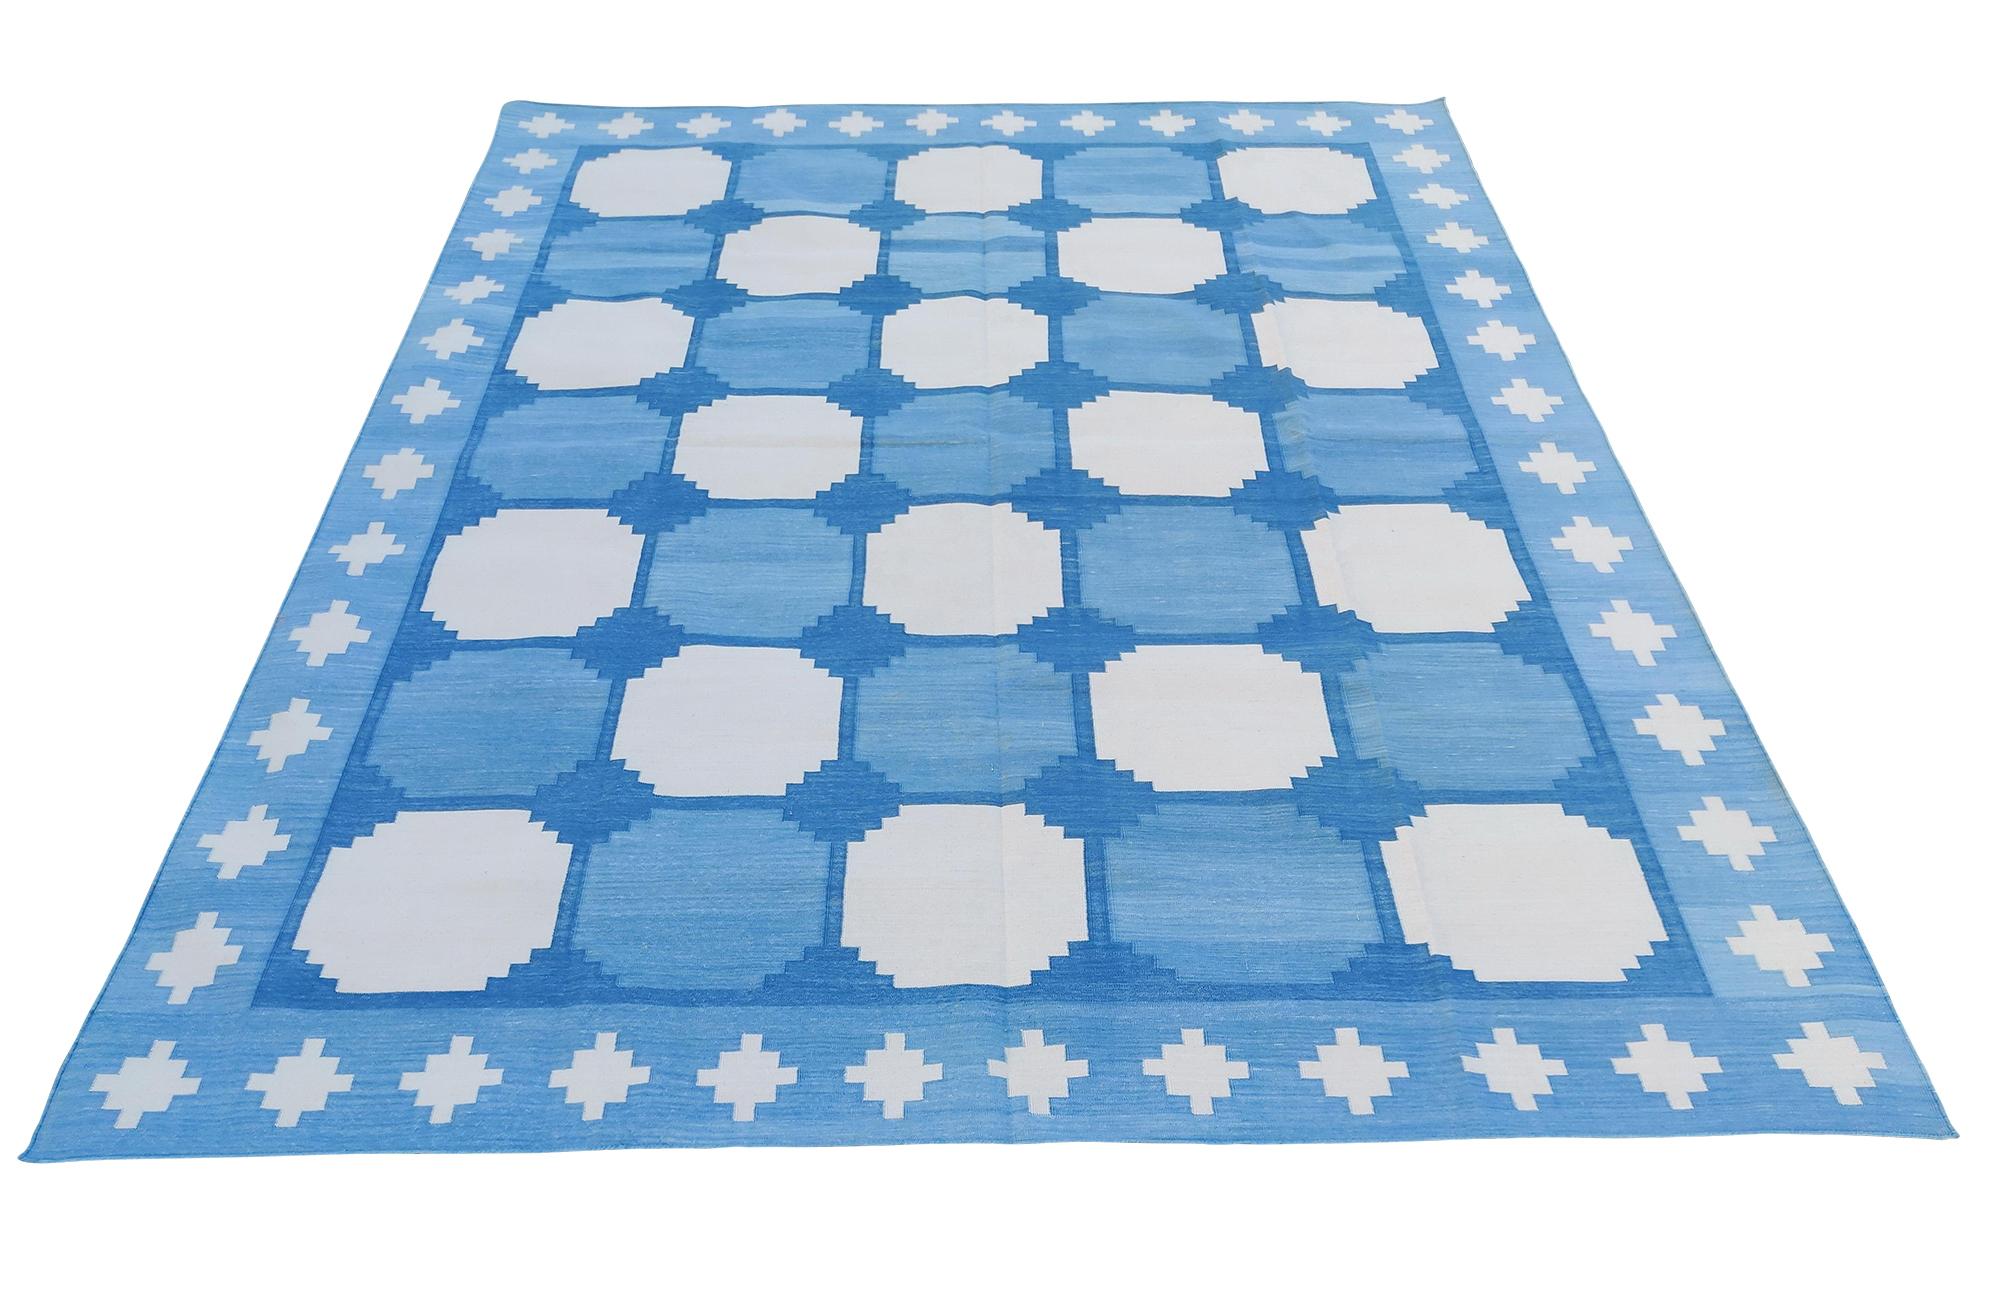 Cotton Natural Vegetable Dyed, Sky Blue And Cream Tile Patterned Rug-9'x12'
These special flat-weave dhurries are hand-woven with 15 ply 100% cotton yarn. Due to the special manufacturing techniques used to create our rugs, the size and color of